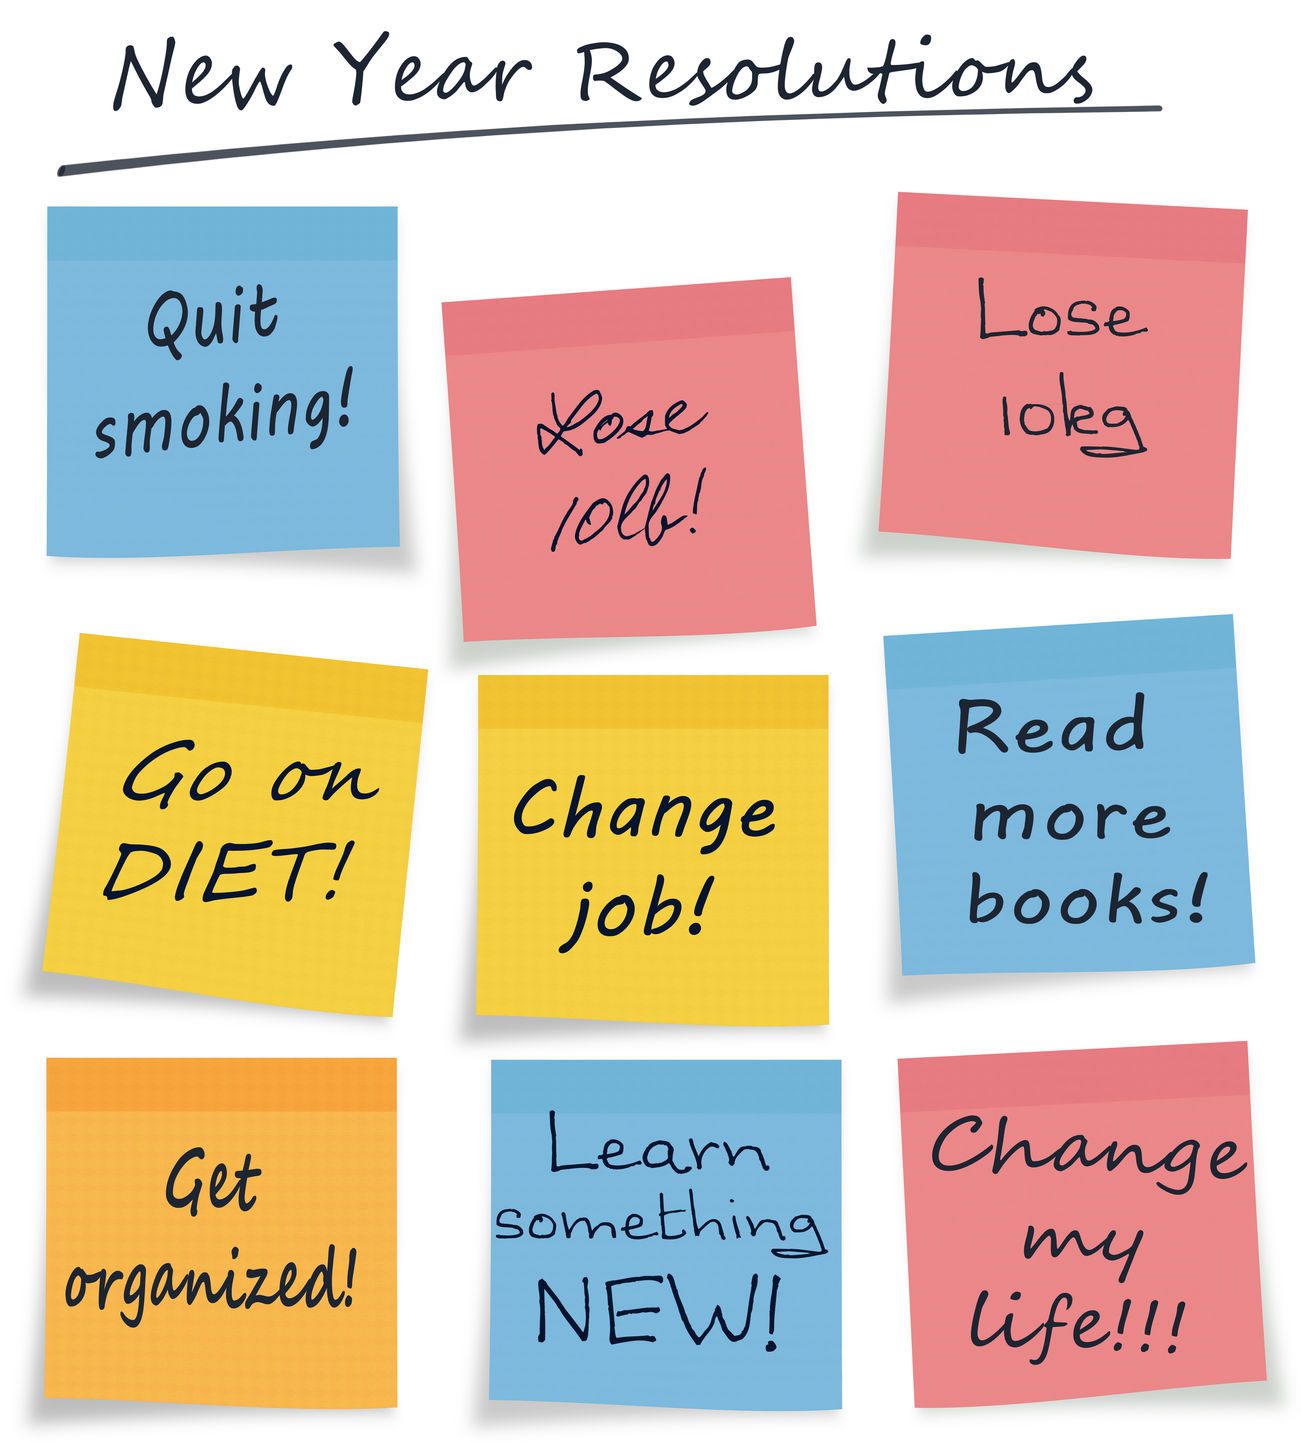 How To Stick To Your New Year’s Resolution